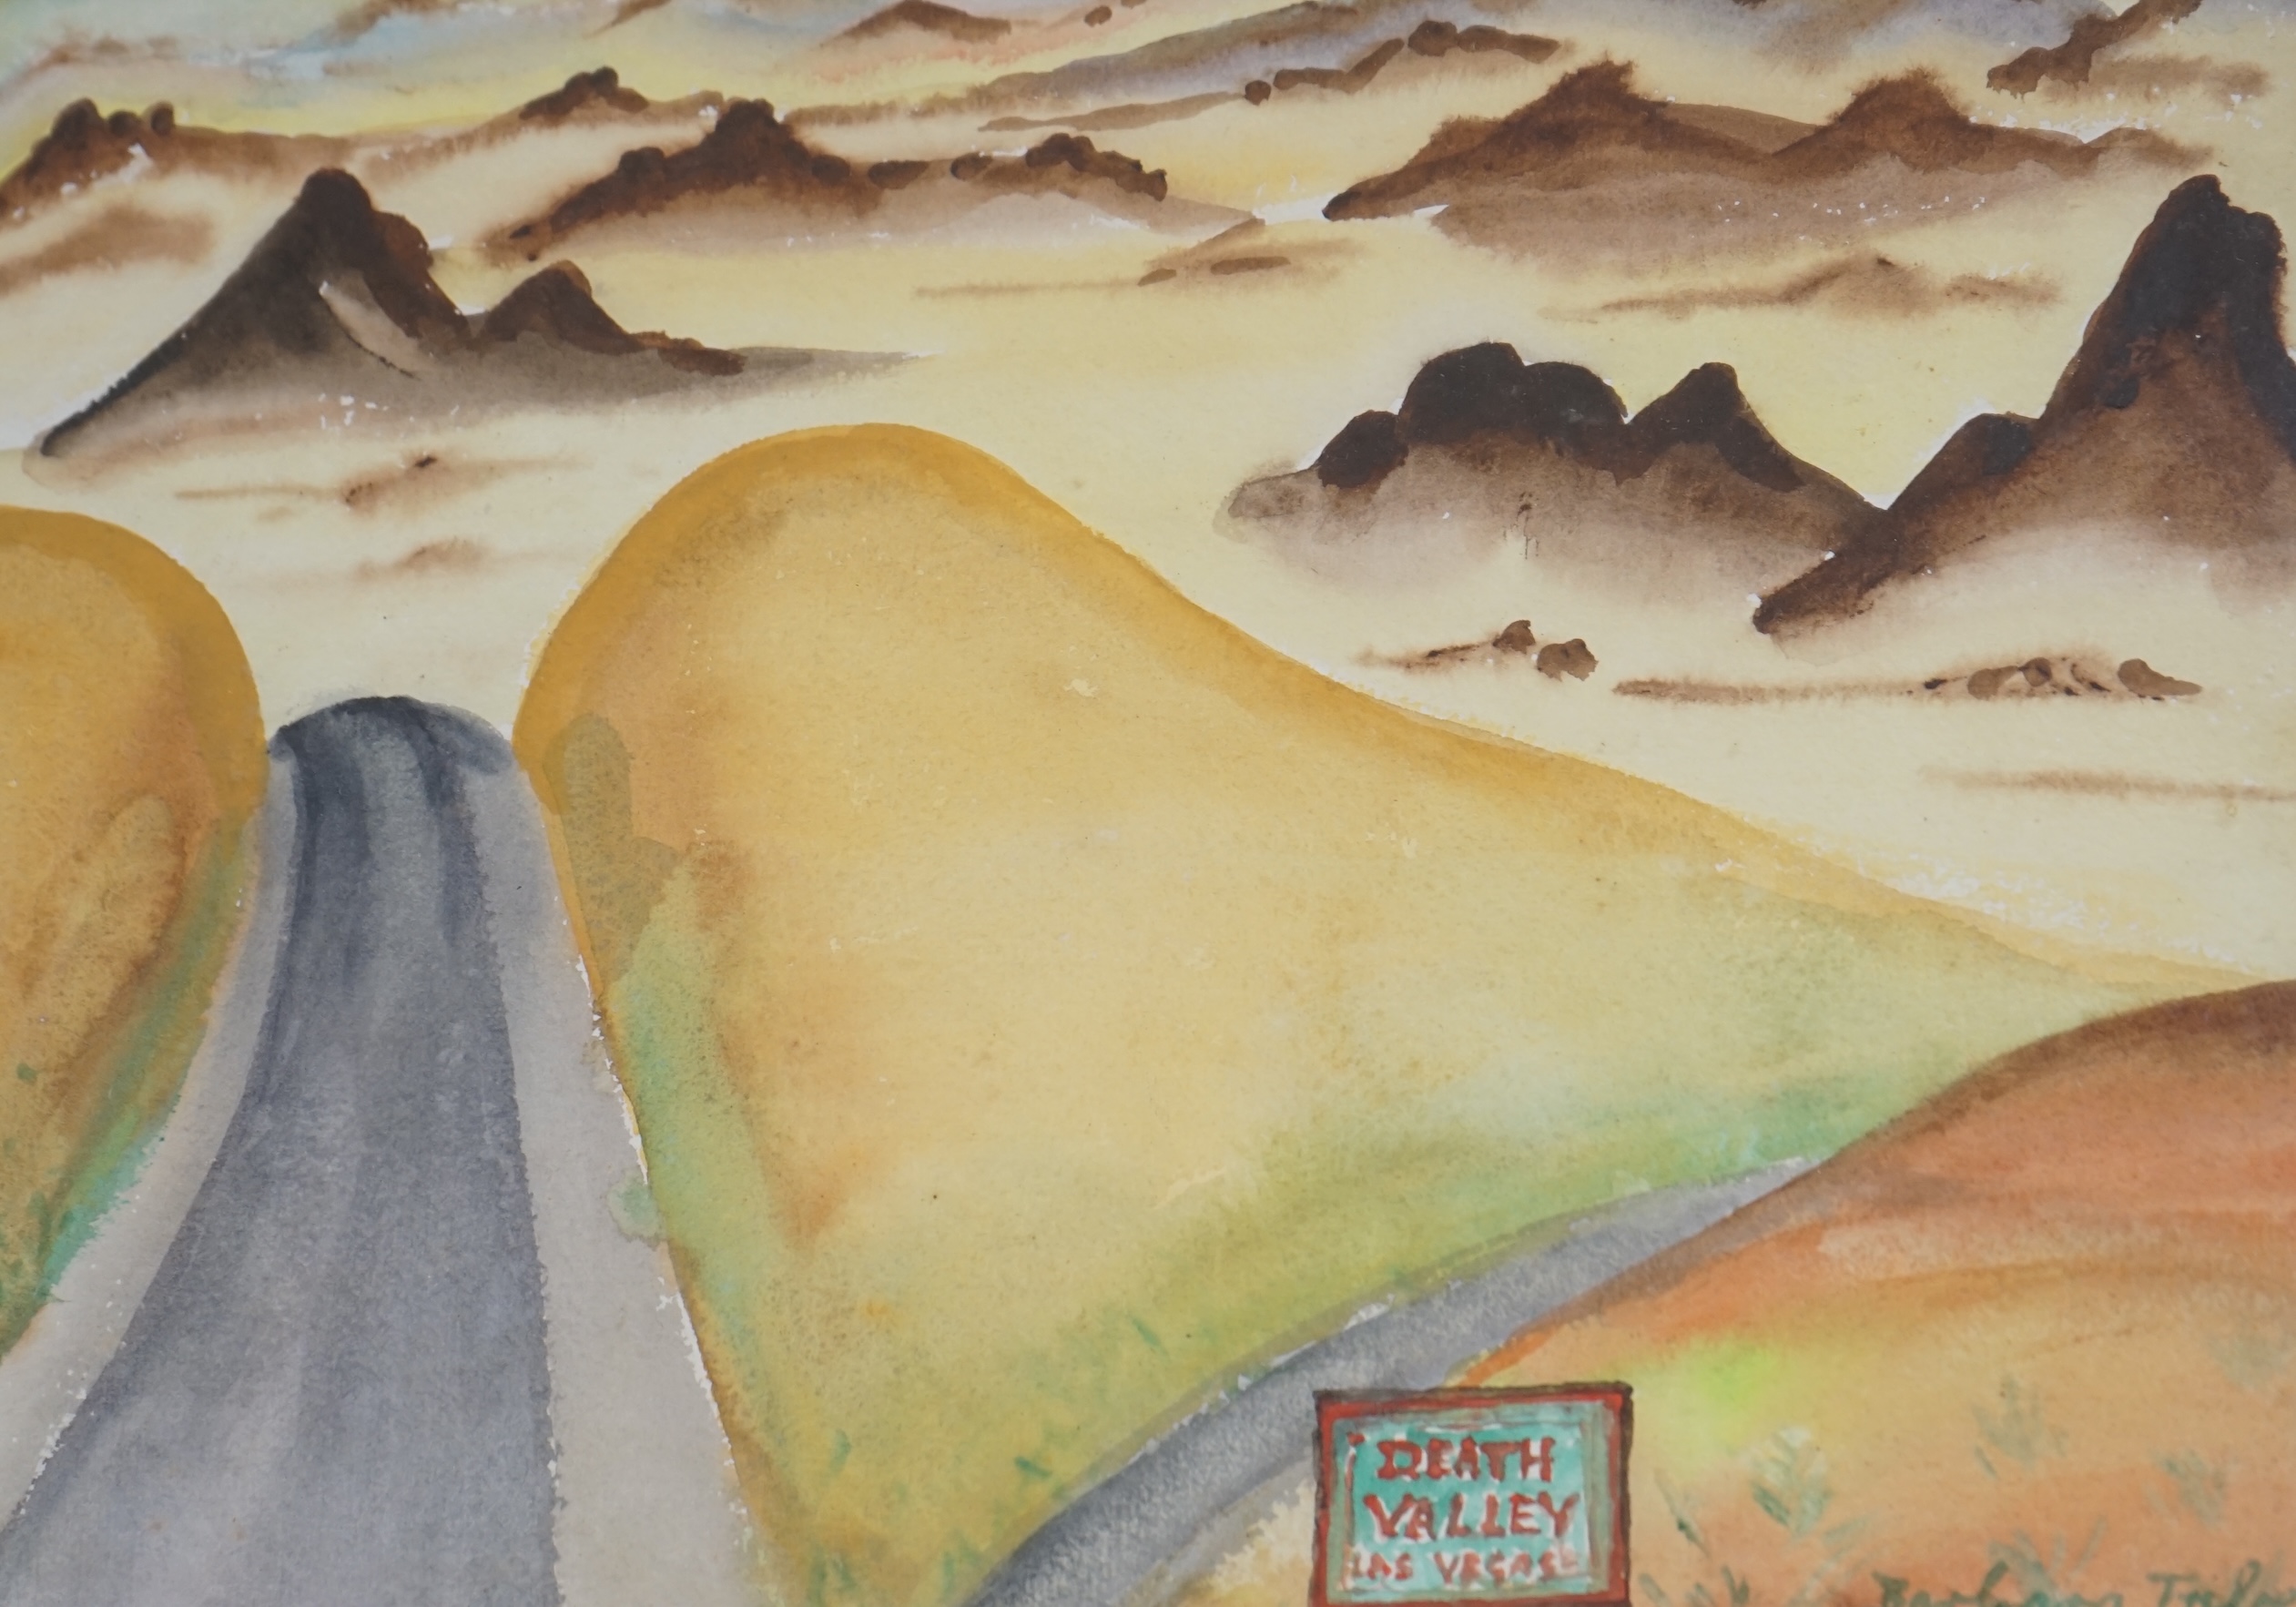 Barbara Tribe (1913-2000), two watercolours, ‘Old Calico Ghost town’ and ‘Death Valley, Mojave Desert, Nevada’, each signed, inscribed labels verso, 27 x 37cm. Condition - fair, would benefit from a clean